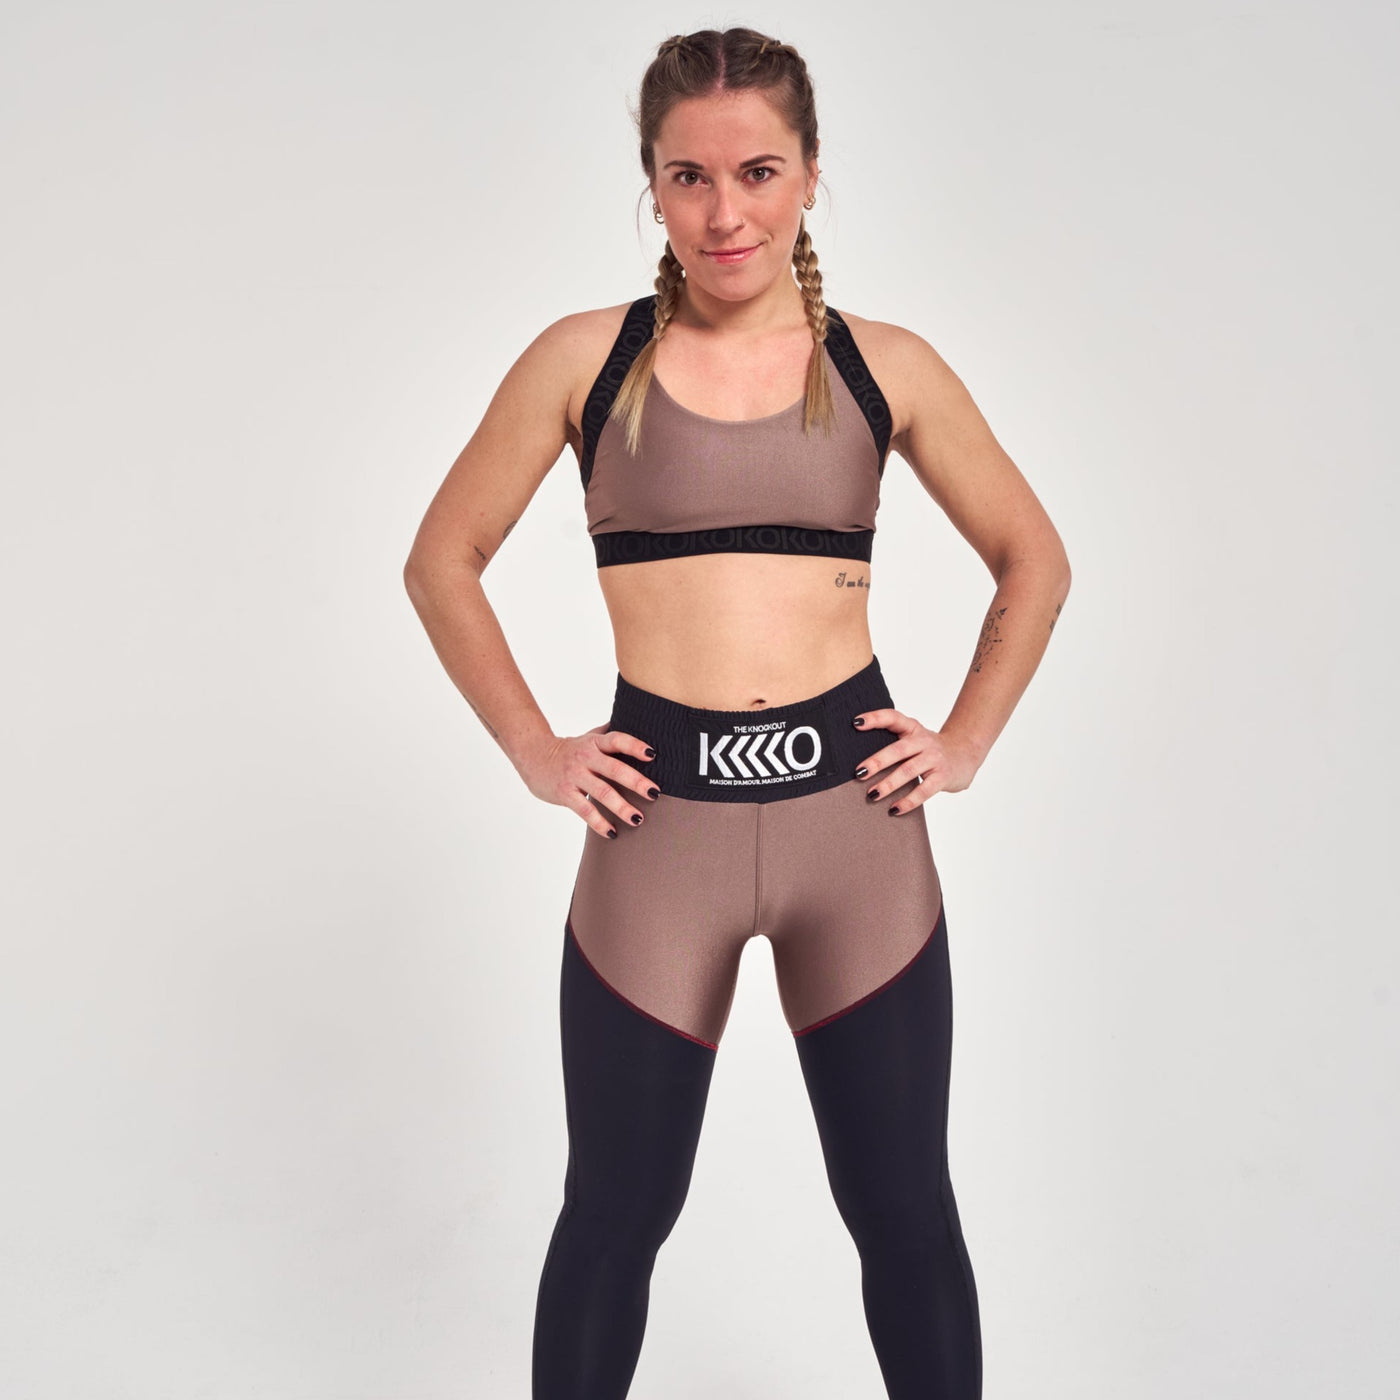 Th Knockout Paris - Kick-In Legging to improve your boxing style – The  Knockout Paris